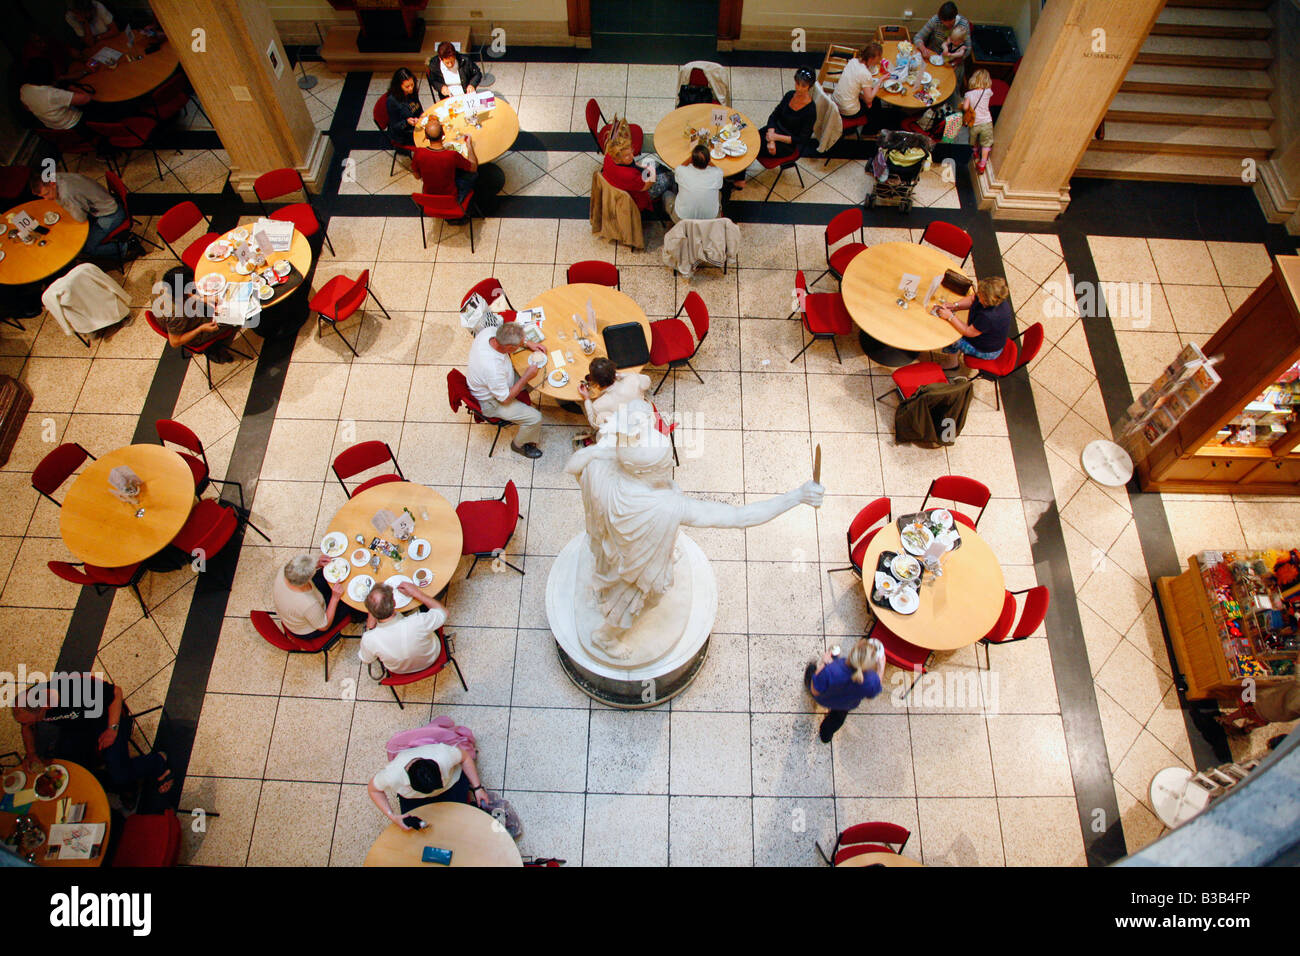 July 2008 - Cafe at the Walker Art Gallery Liverpool England UK Stock Photo